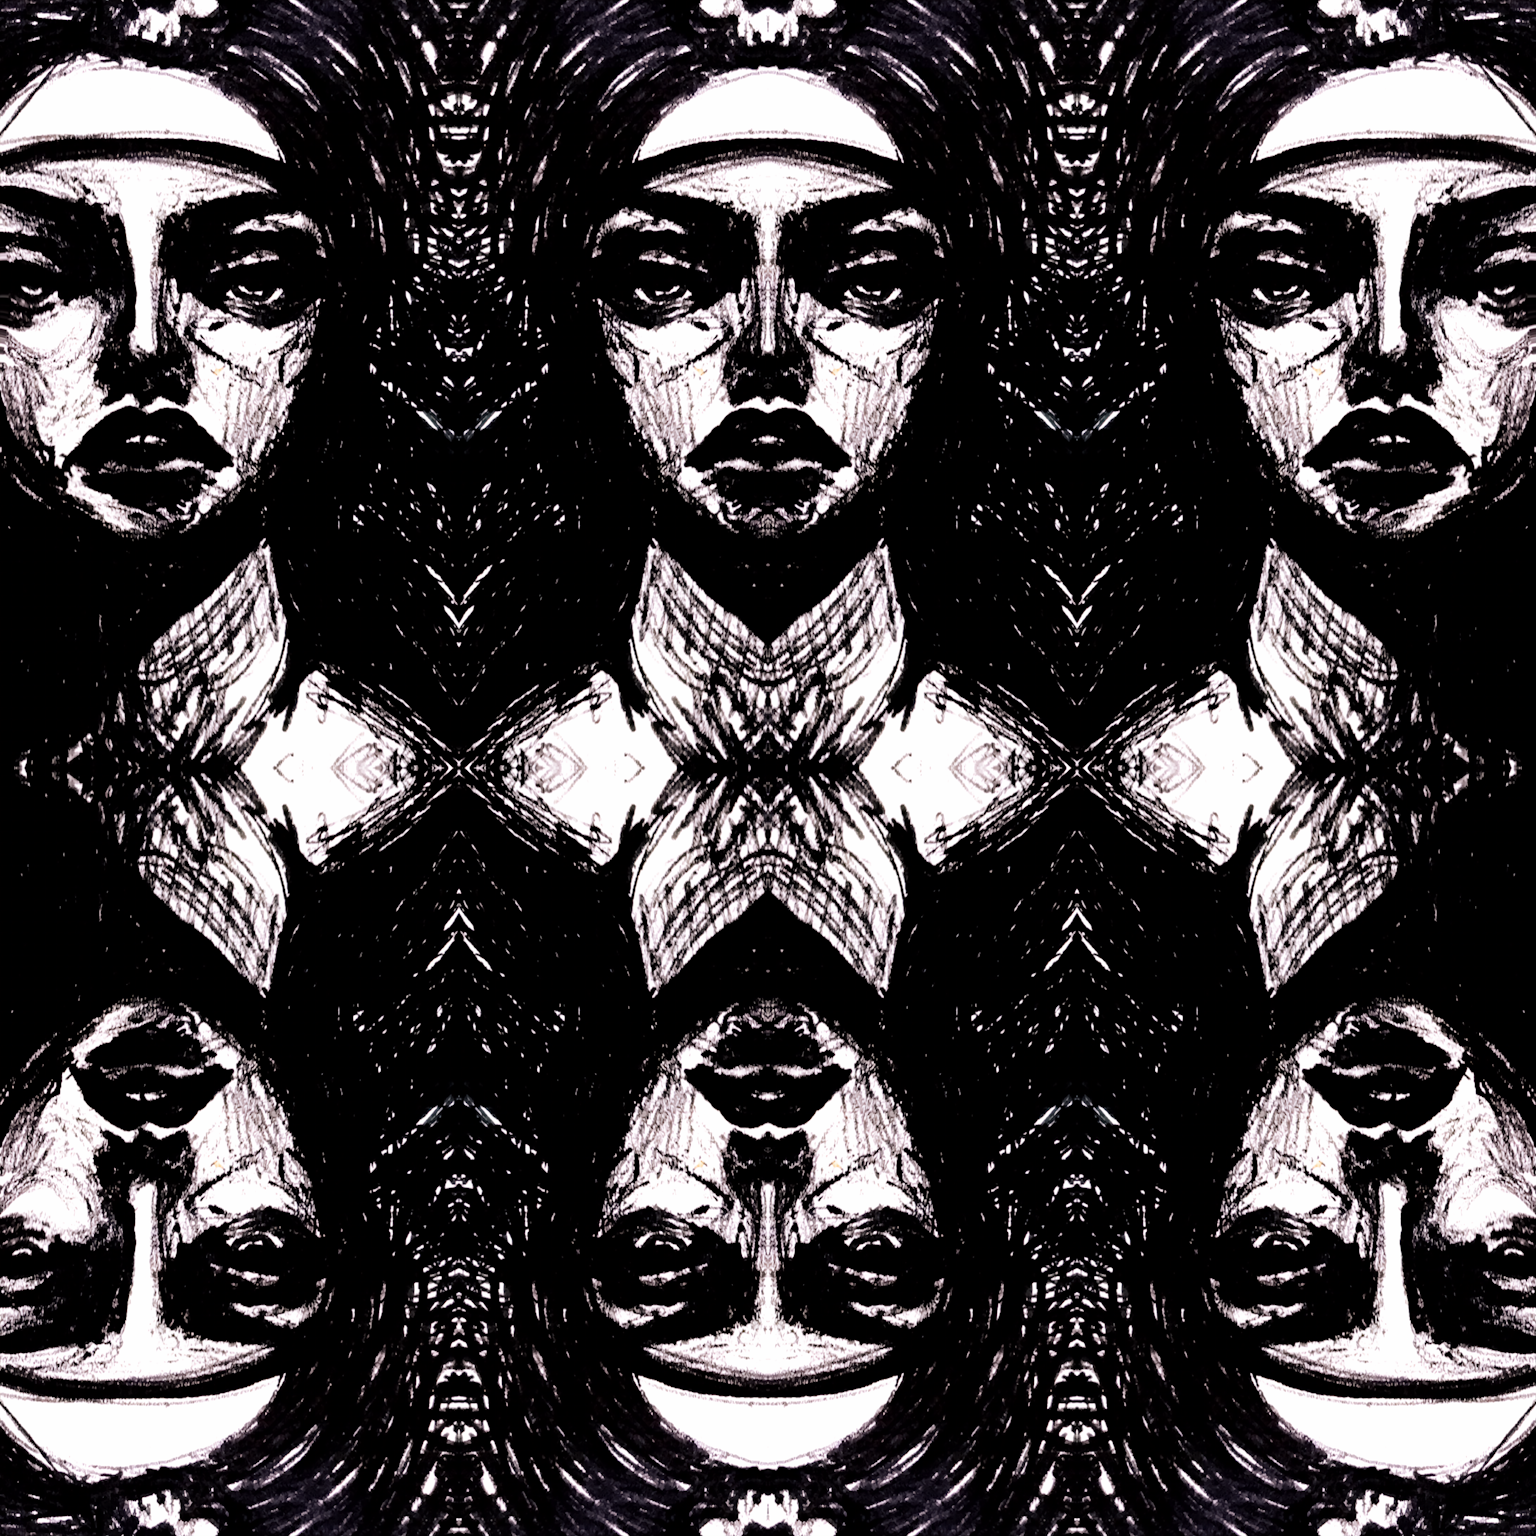 Ink sketch, digitally manipulated.\nUnyielding. Achromic. Looking right at you.